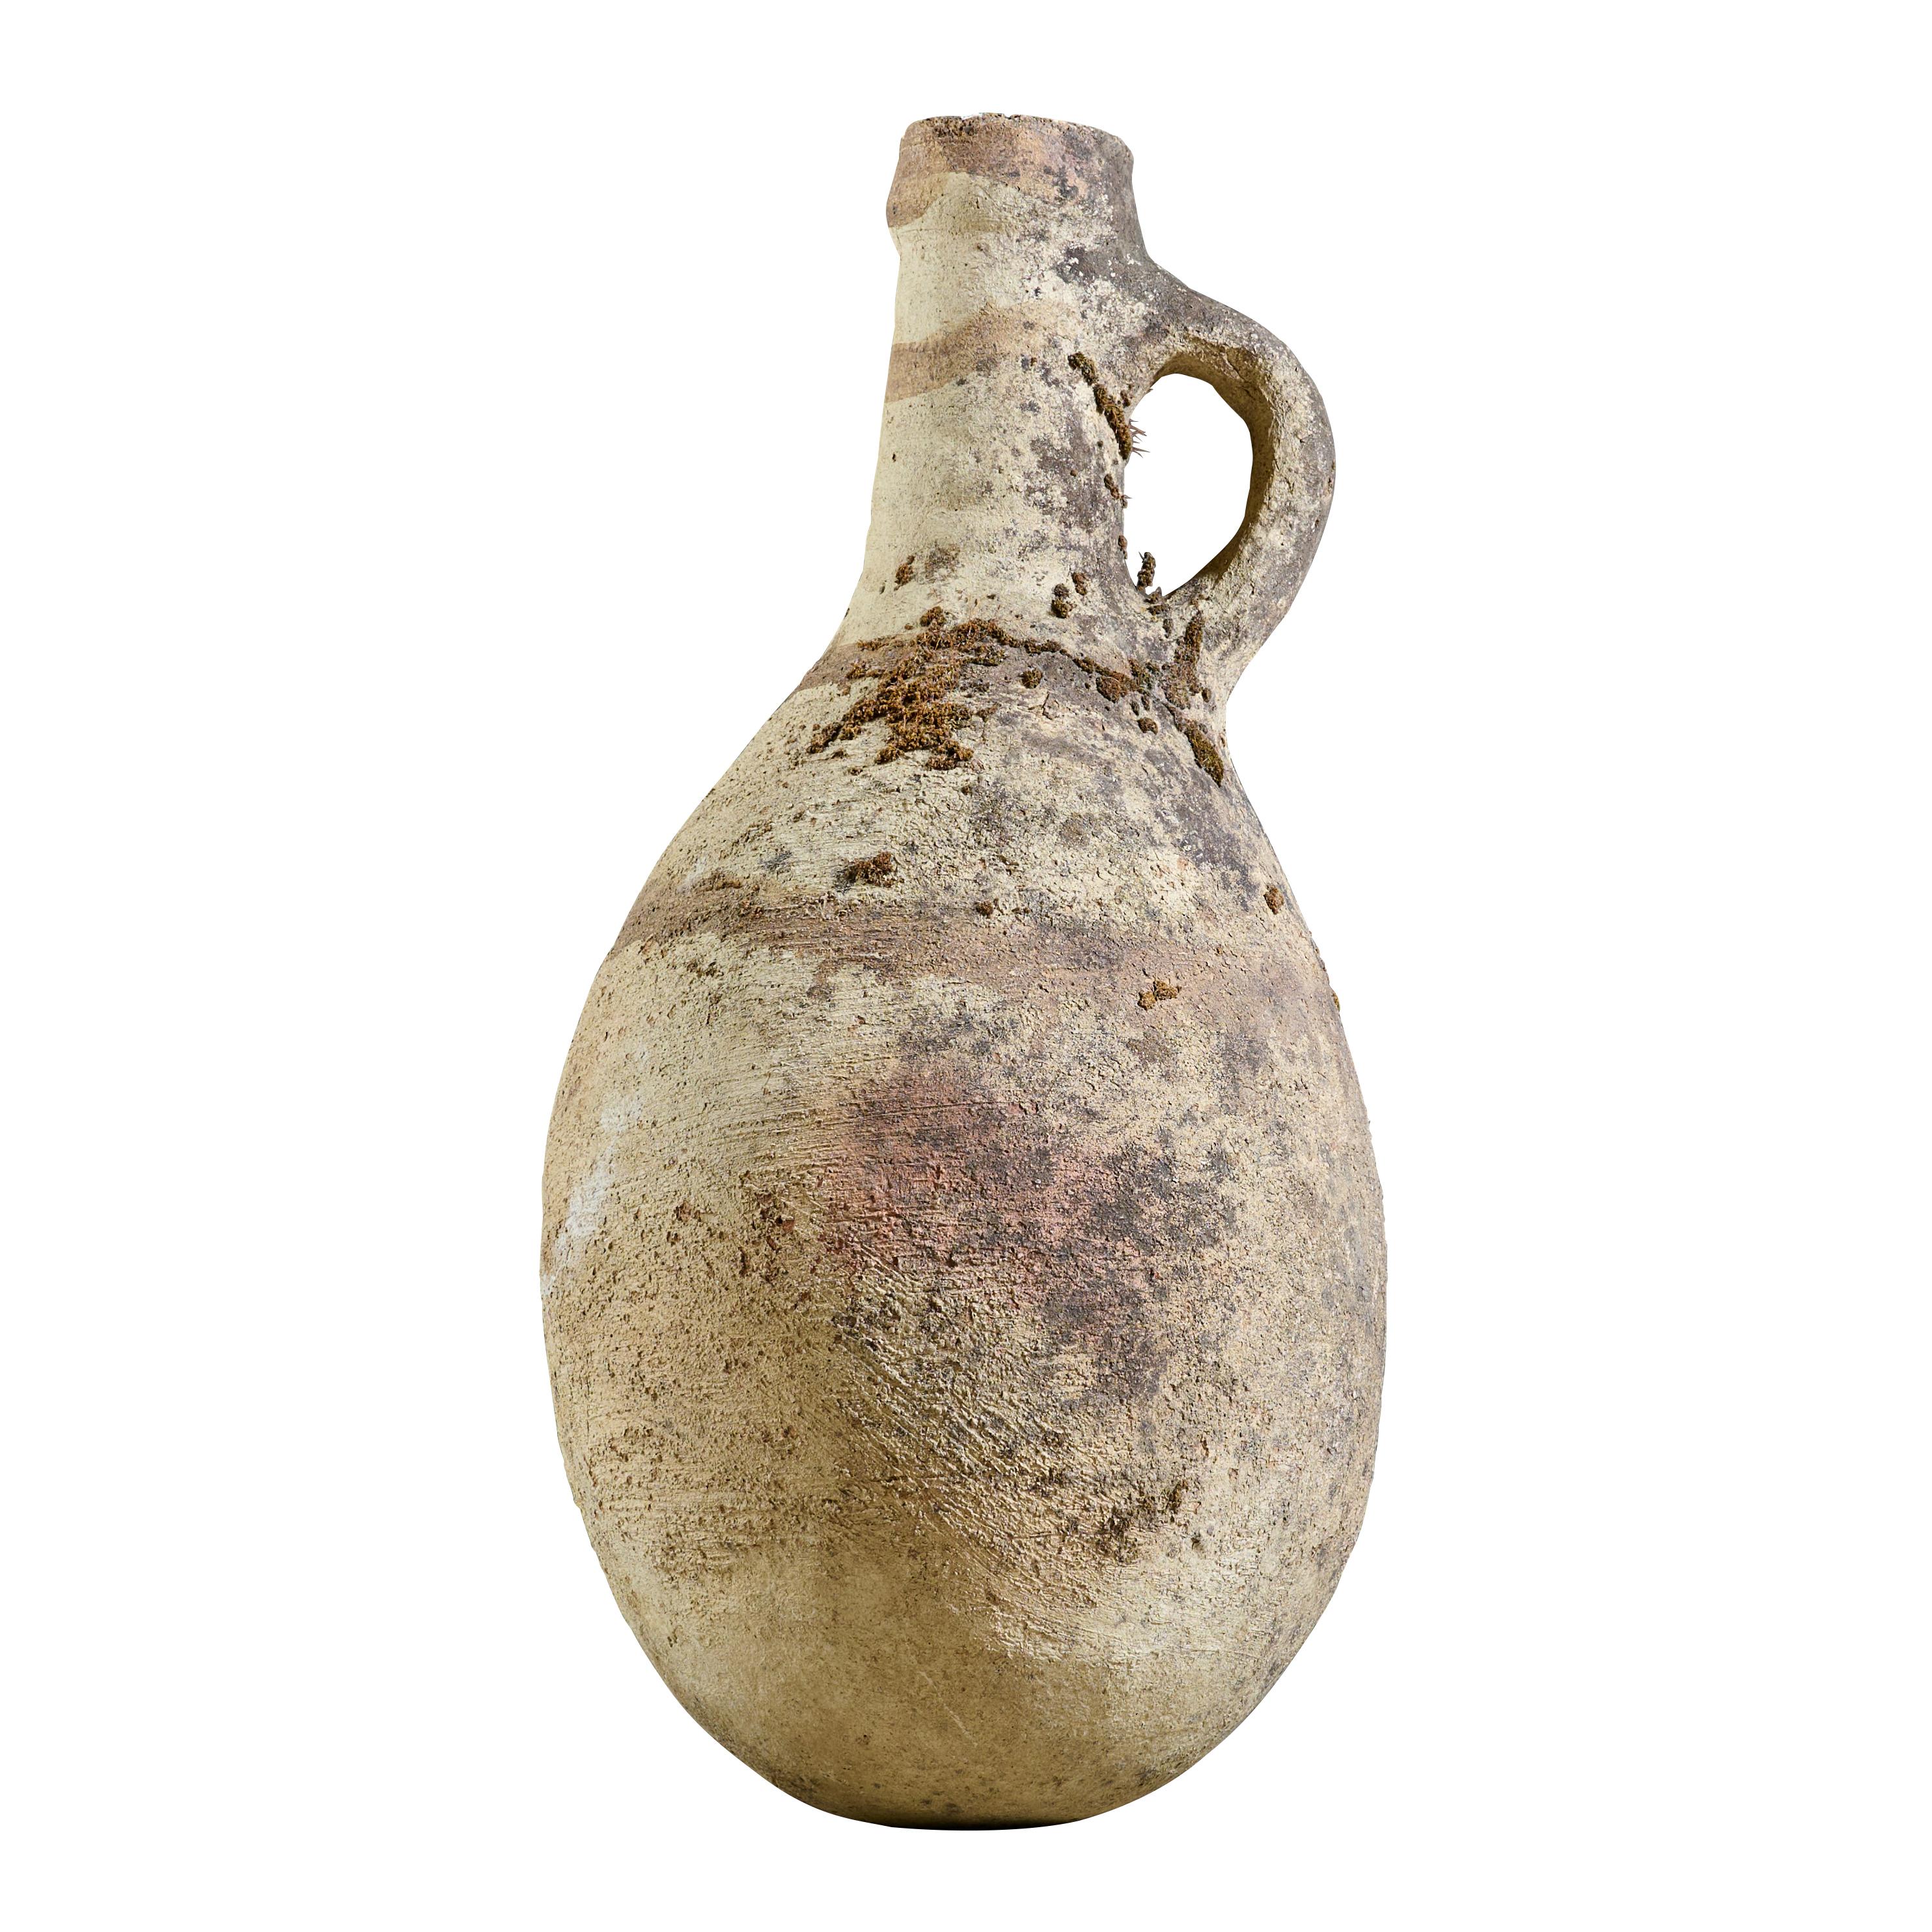 Terra cotta wine vessel with wonderful handle and great patina.

